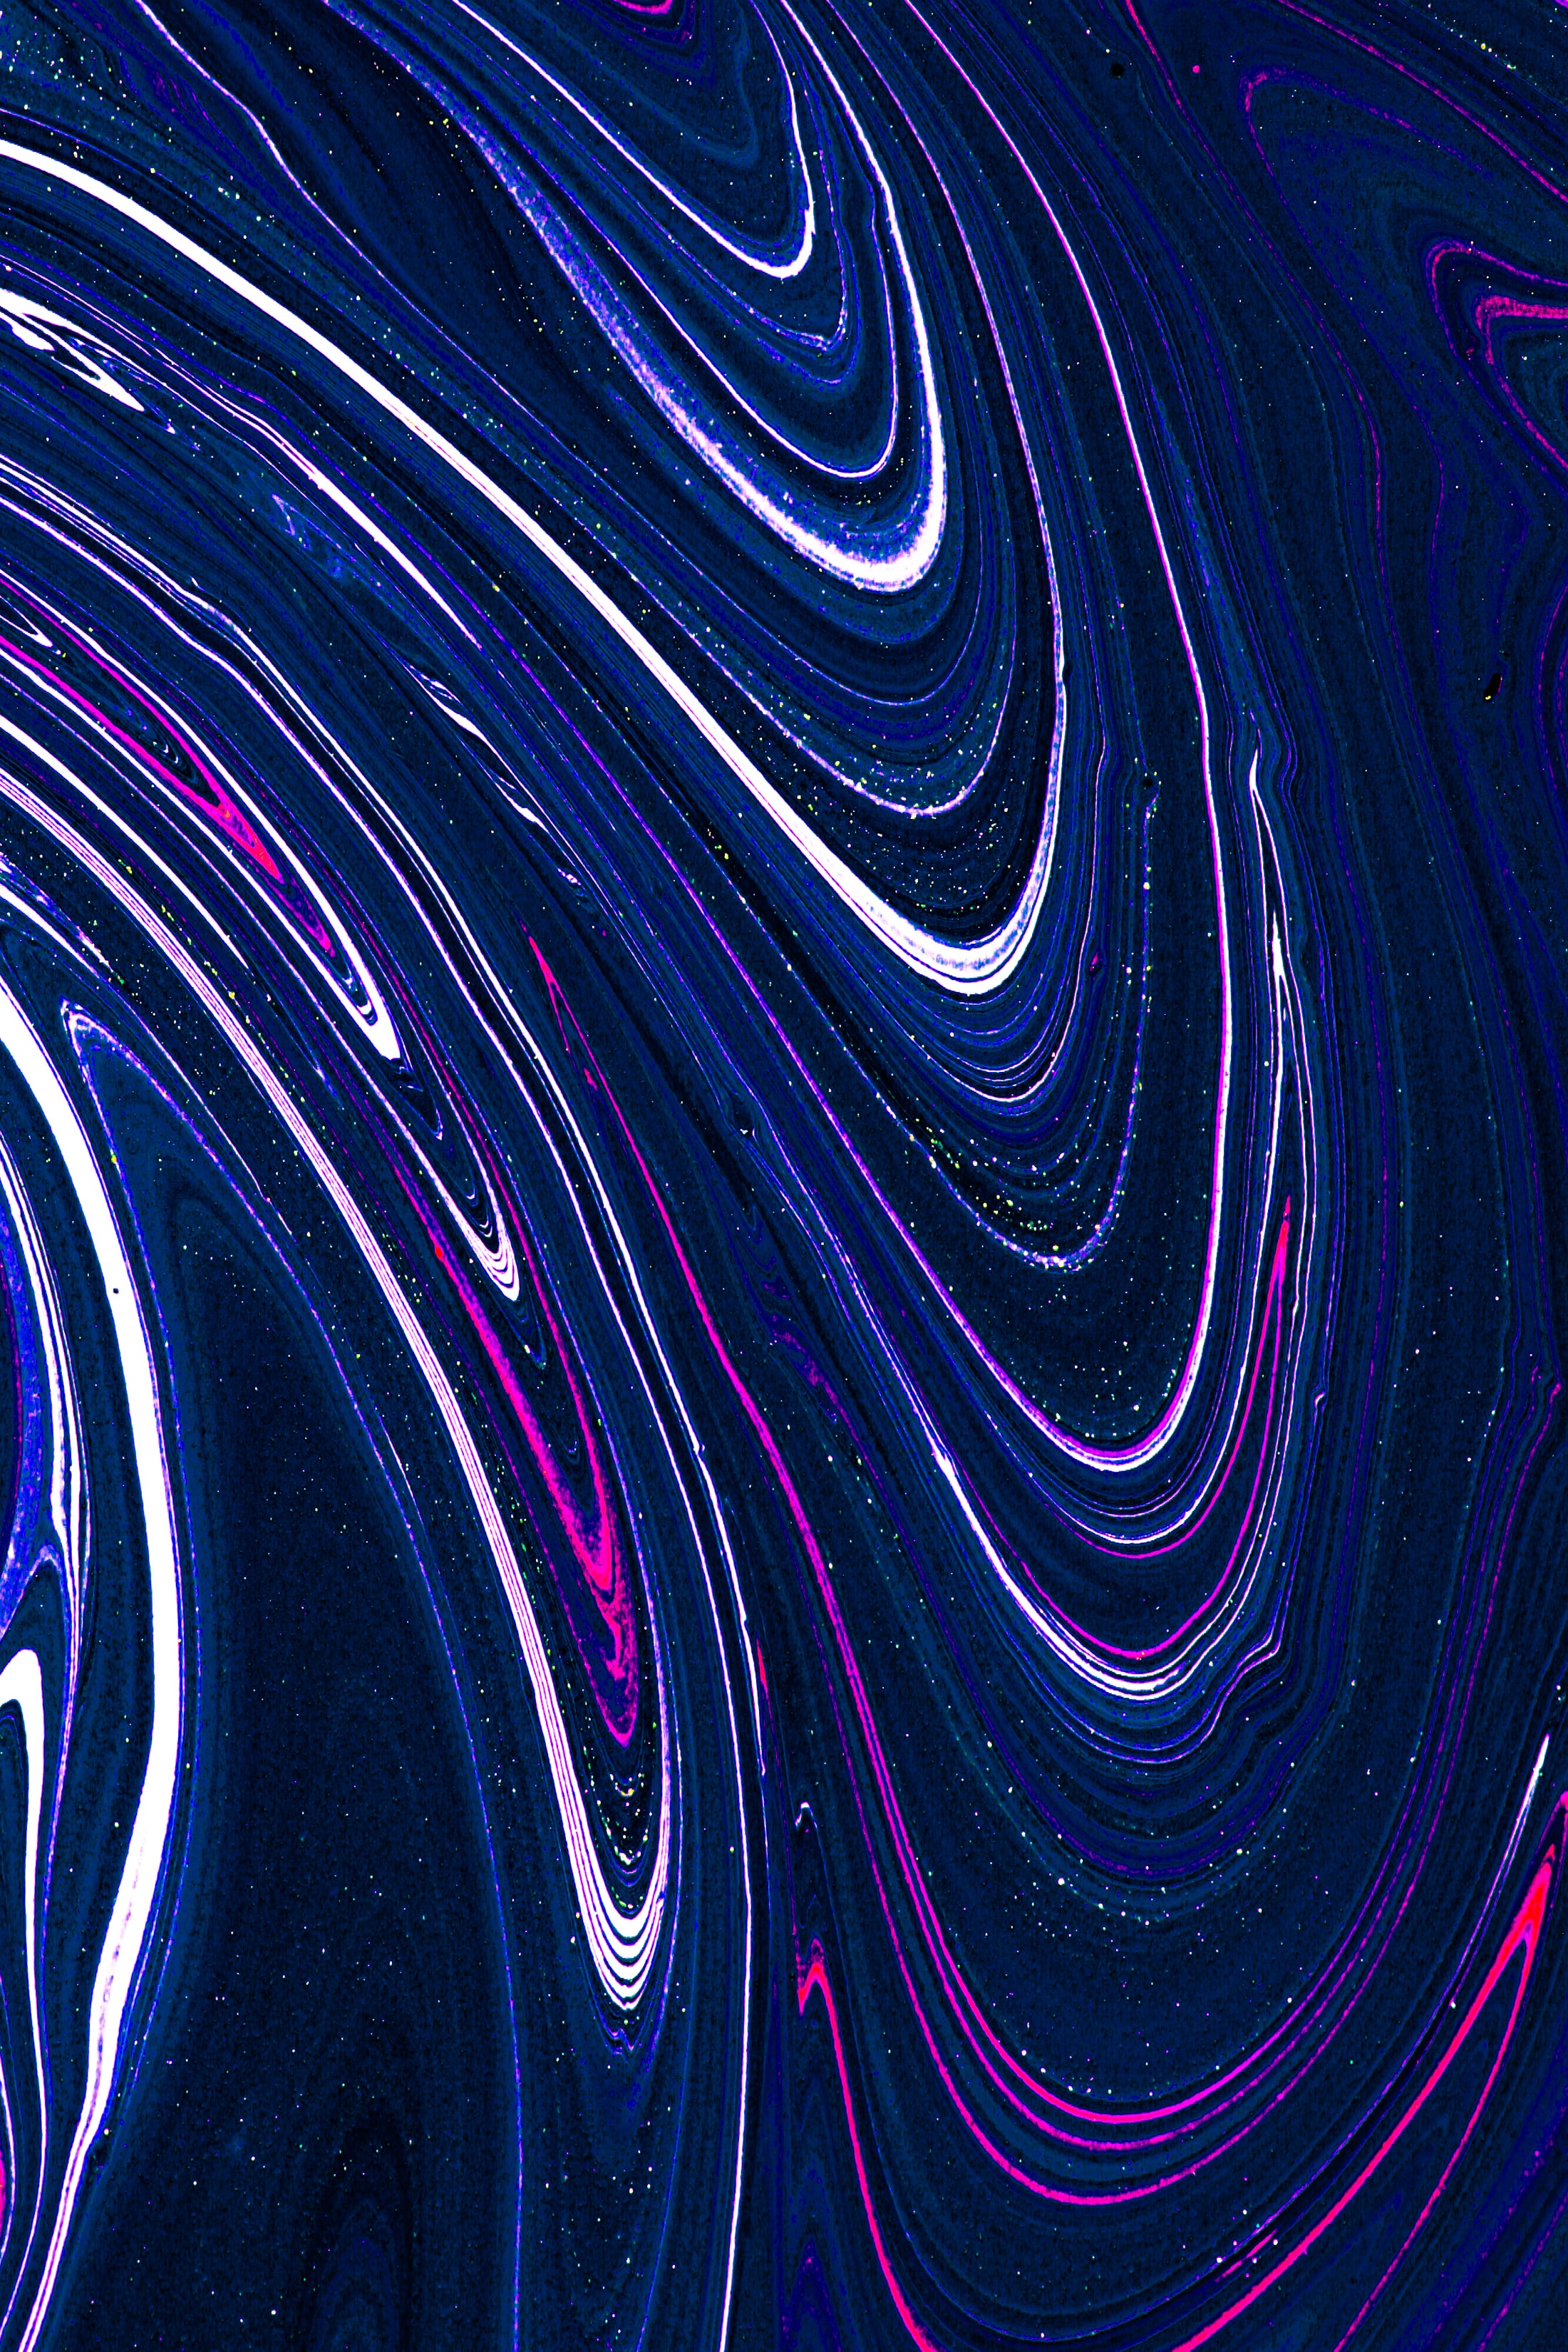 133395 download wallpaper paint, abstract, divorces, liquid, fluid art, tinsel, sequins screensavers and pictures for free